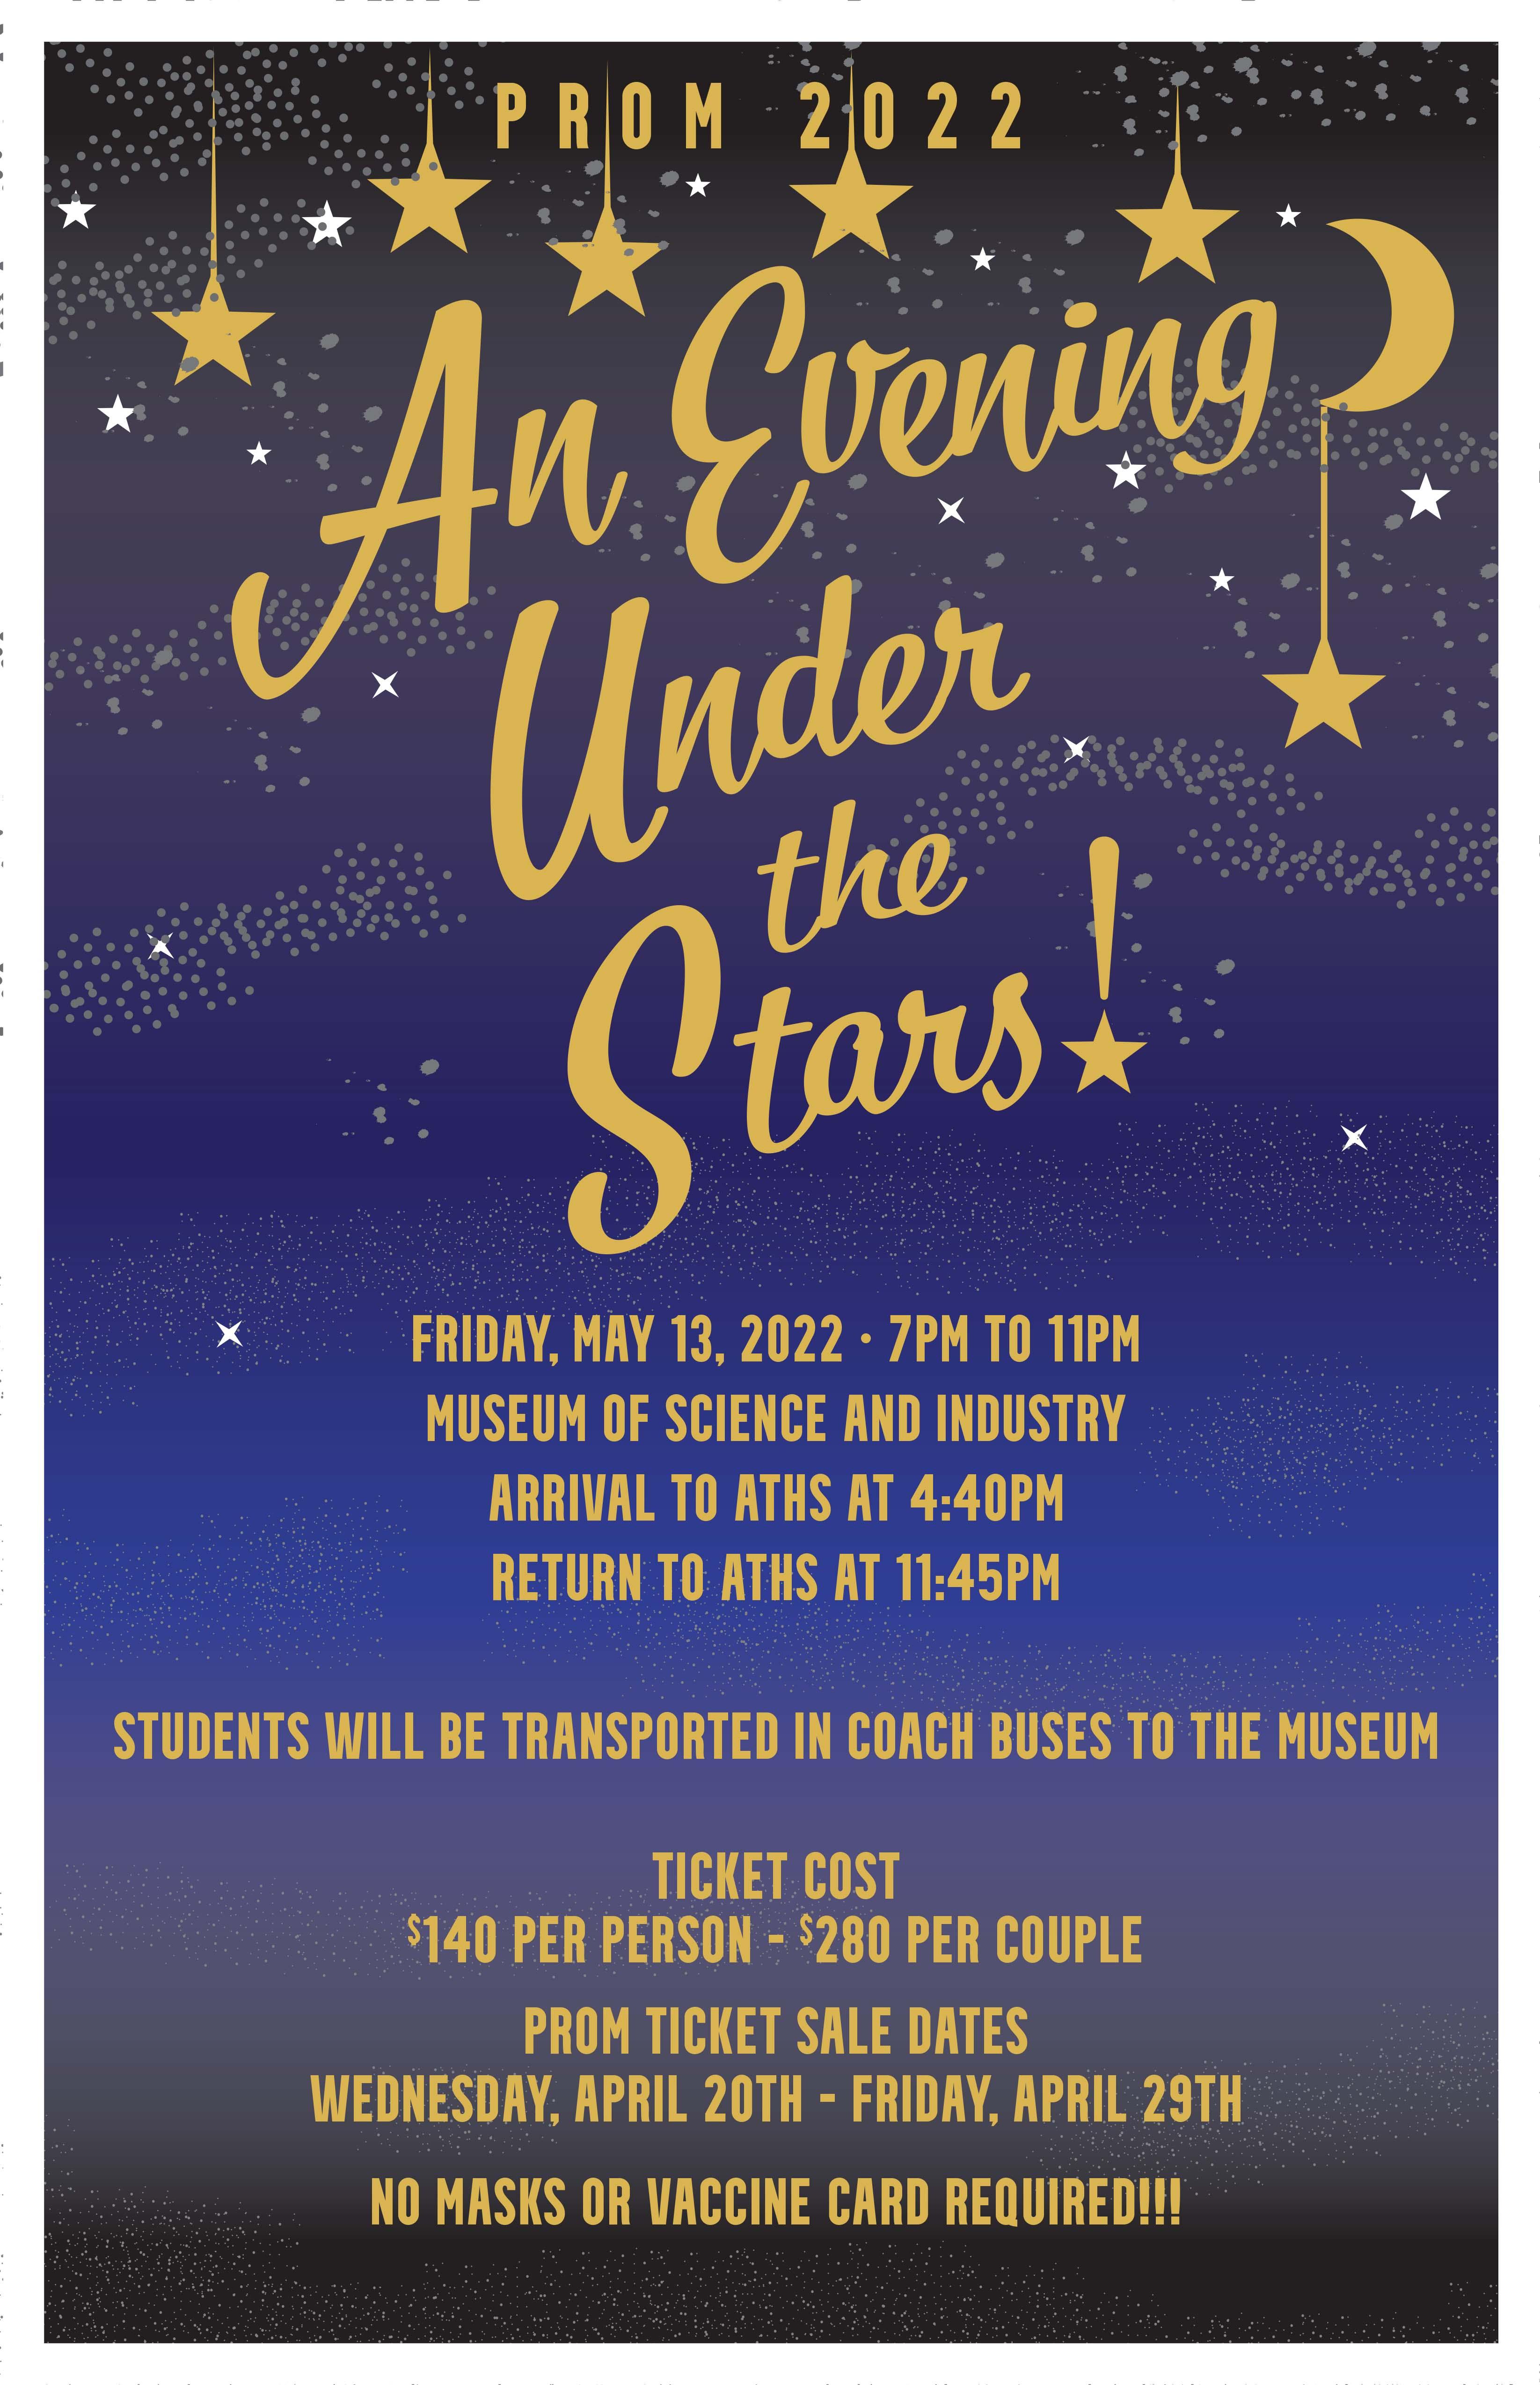 Addison Trail High School - Prom details (tickets on sale April 20 to 29)